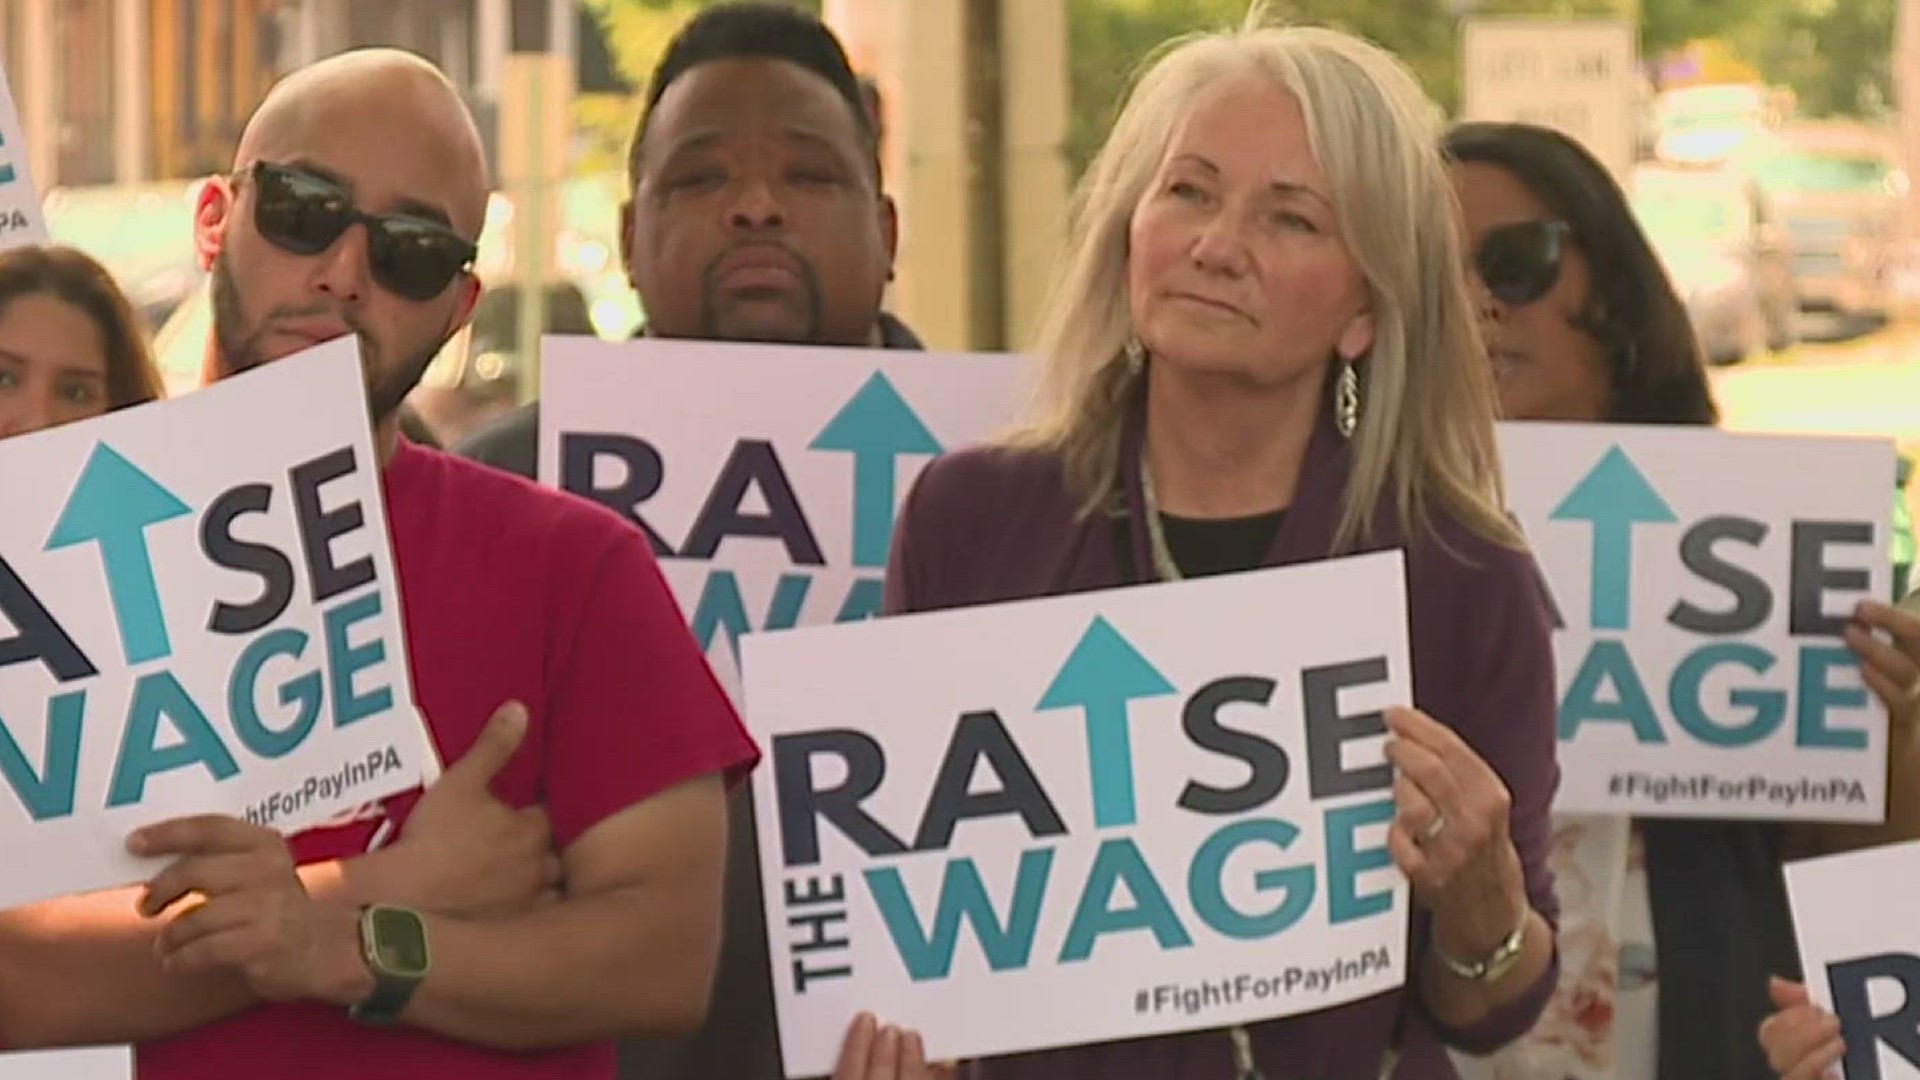 Sen. Art Haywood (D-Montgomery/Phila) and Rep. Ismail Smith-Wade-El (D-Lancaster) held a rally to call for raising the minimum wage to $15.